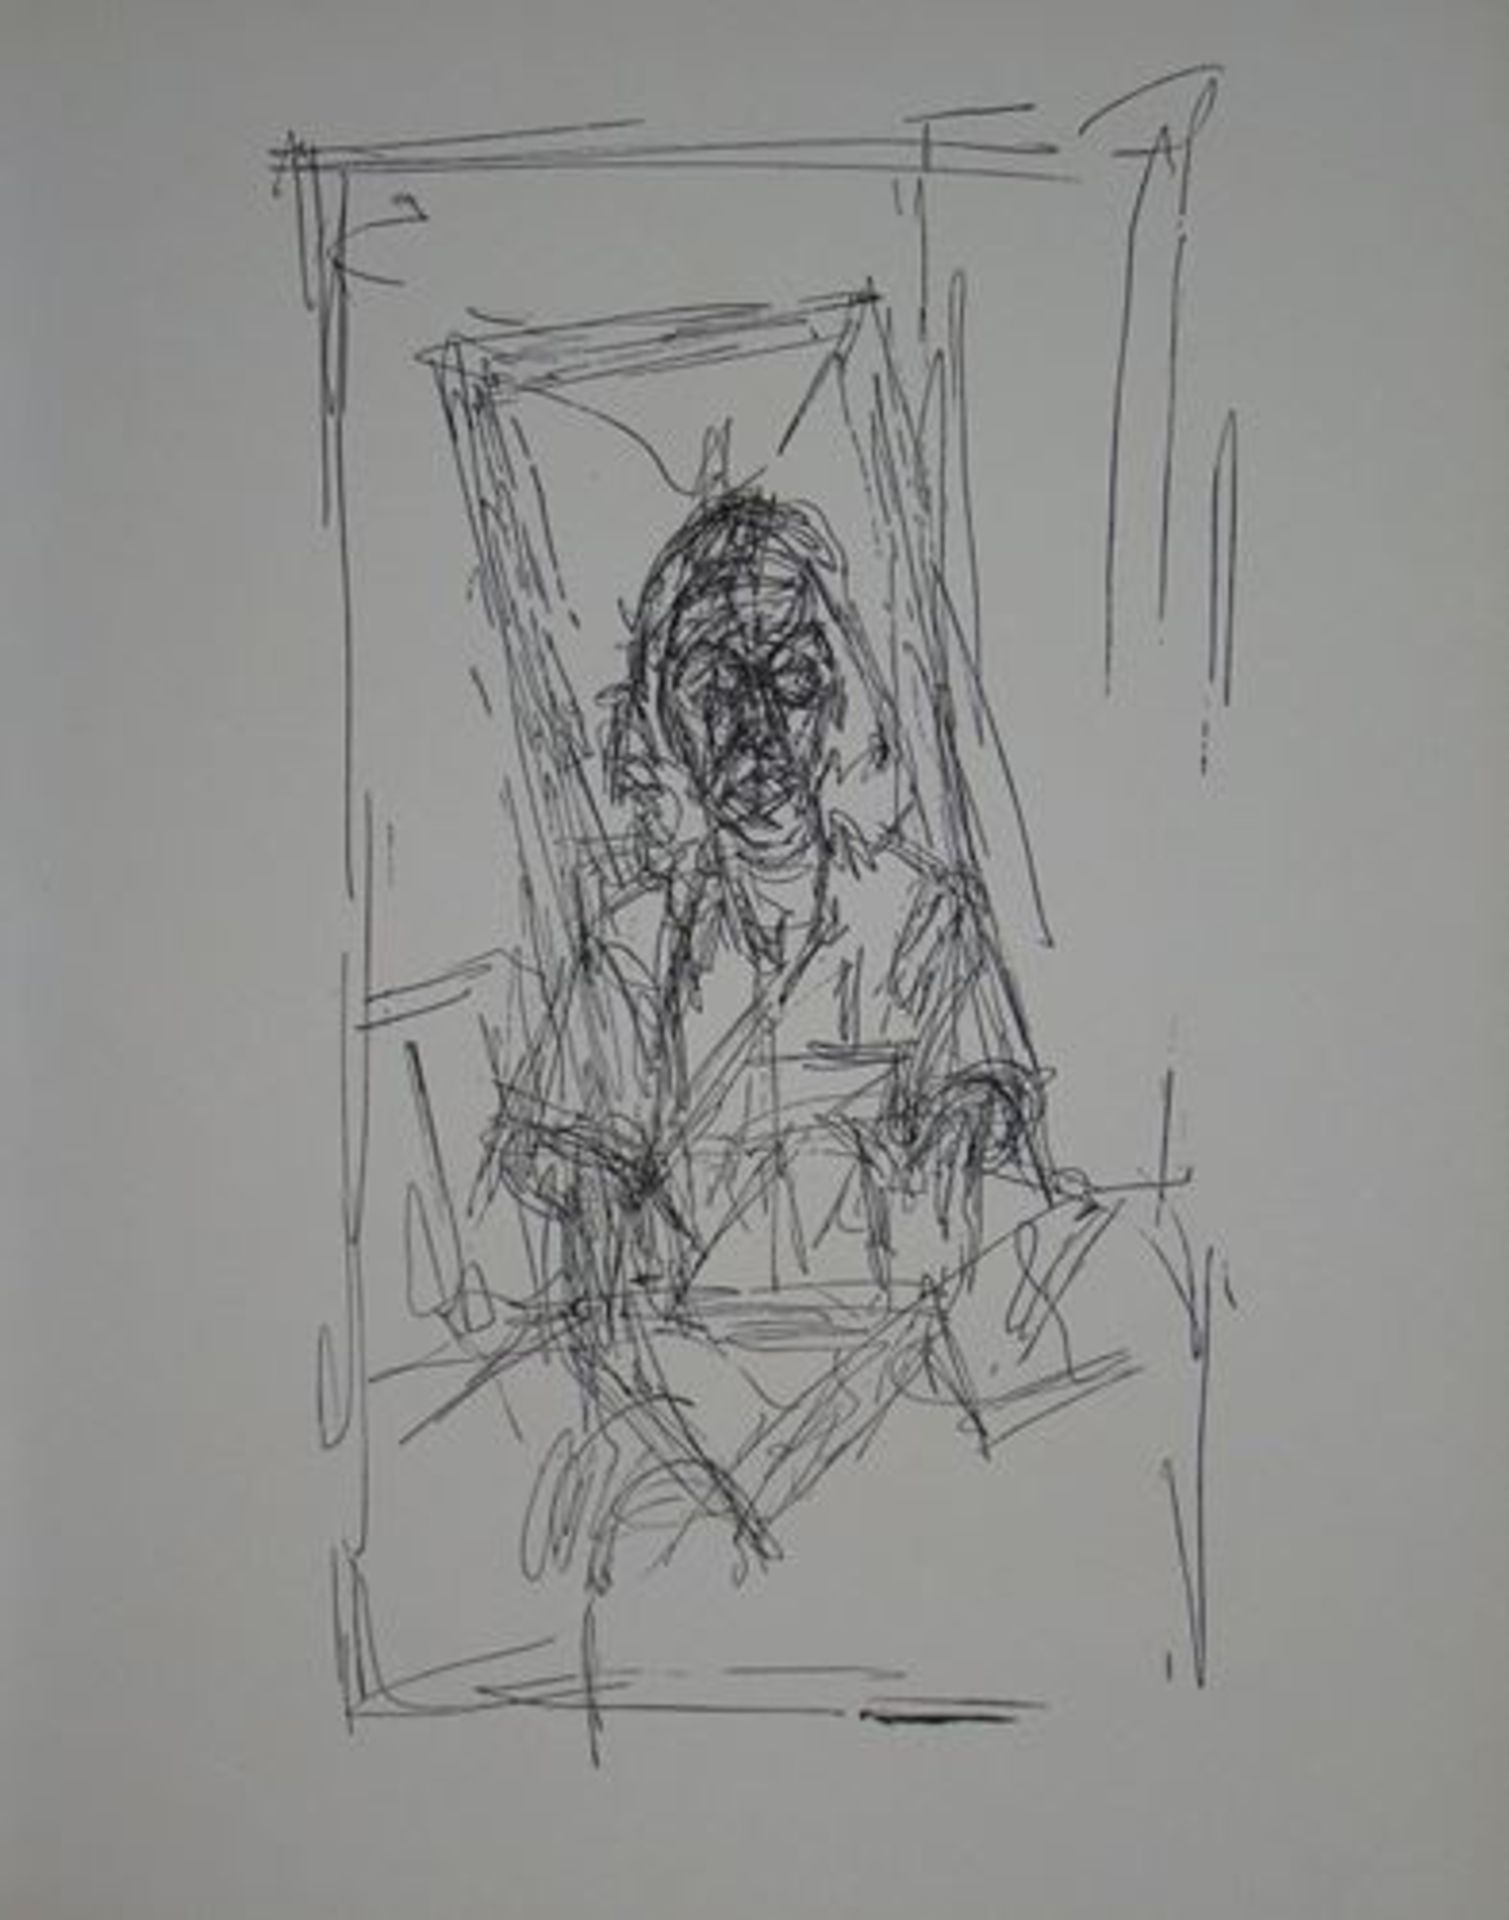 ALBERTO GIACOMETTI - Original lithograph on vellum paper after a drawing from [...]